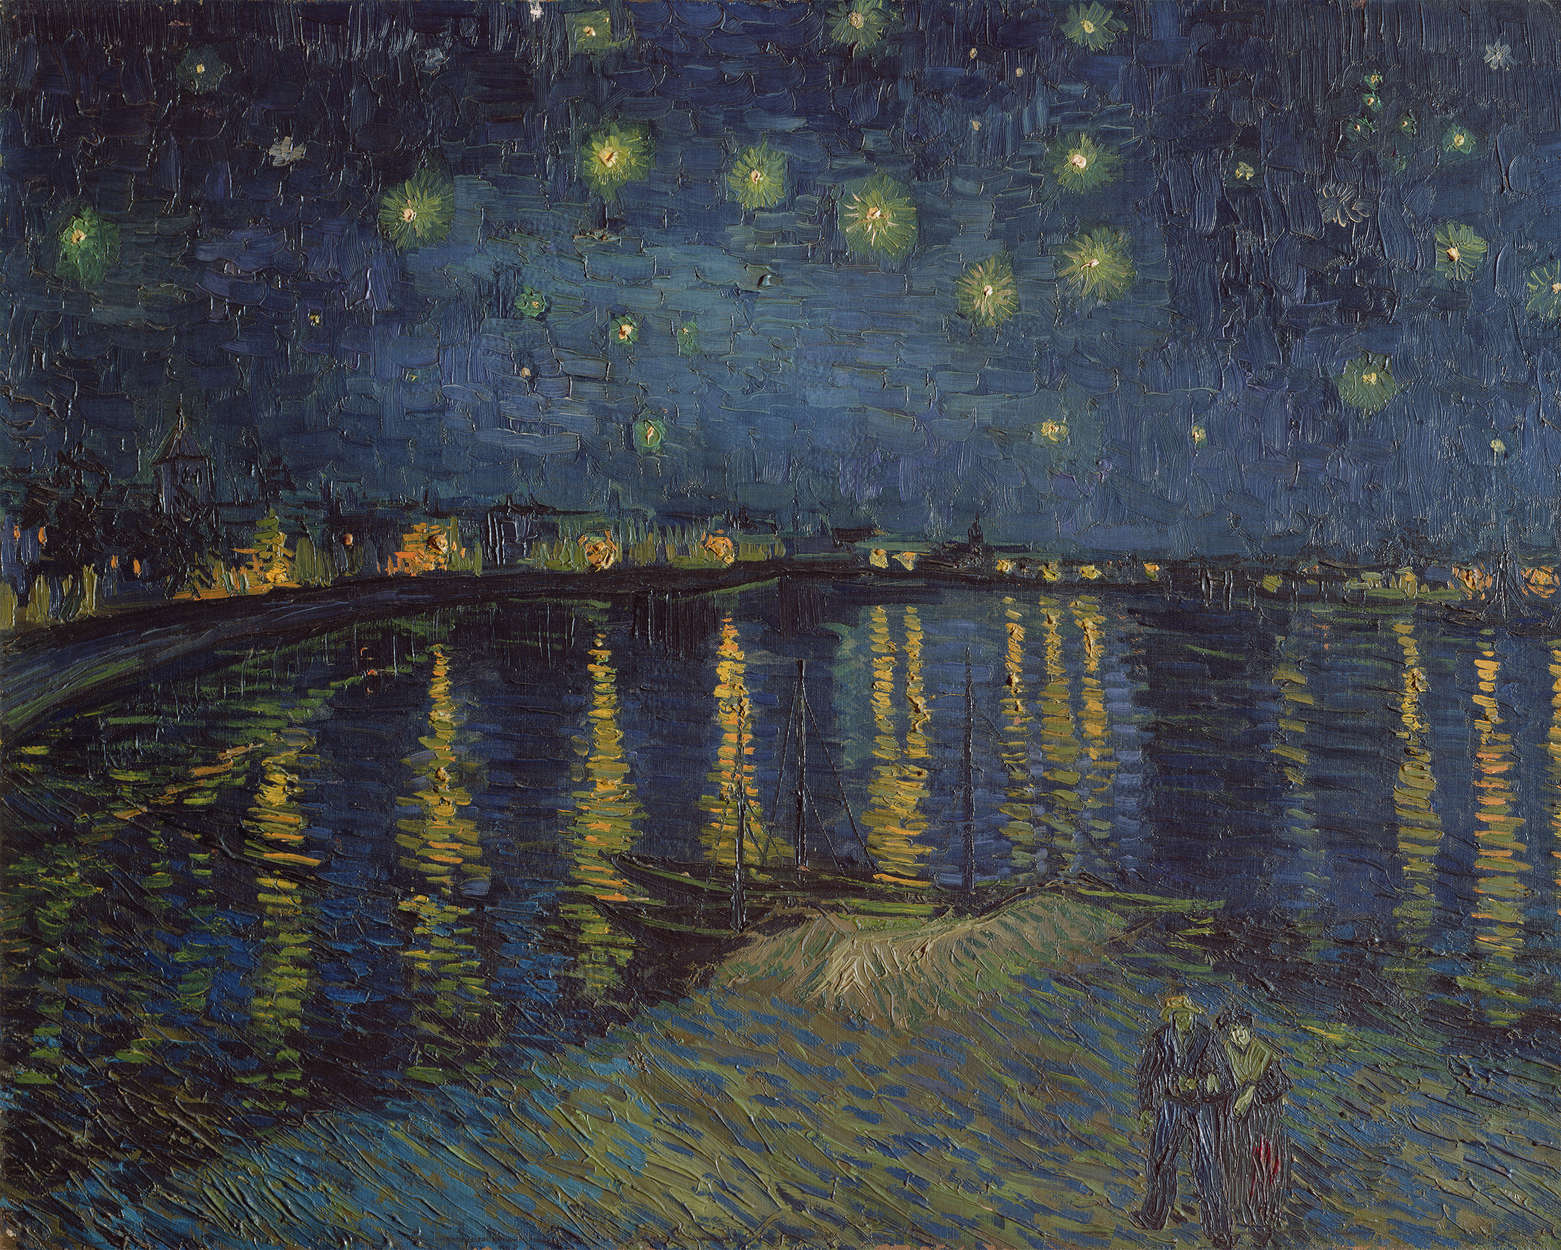             Photo wallpaper "Starry night over the Rhone" by Vincent van Gogh
        